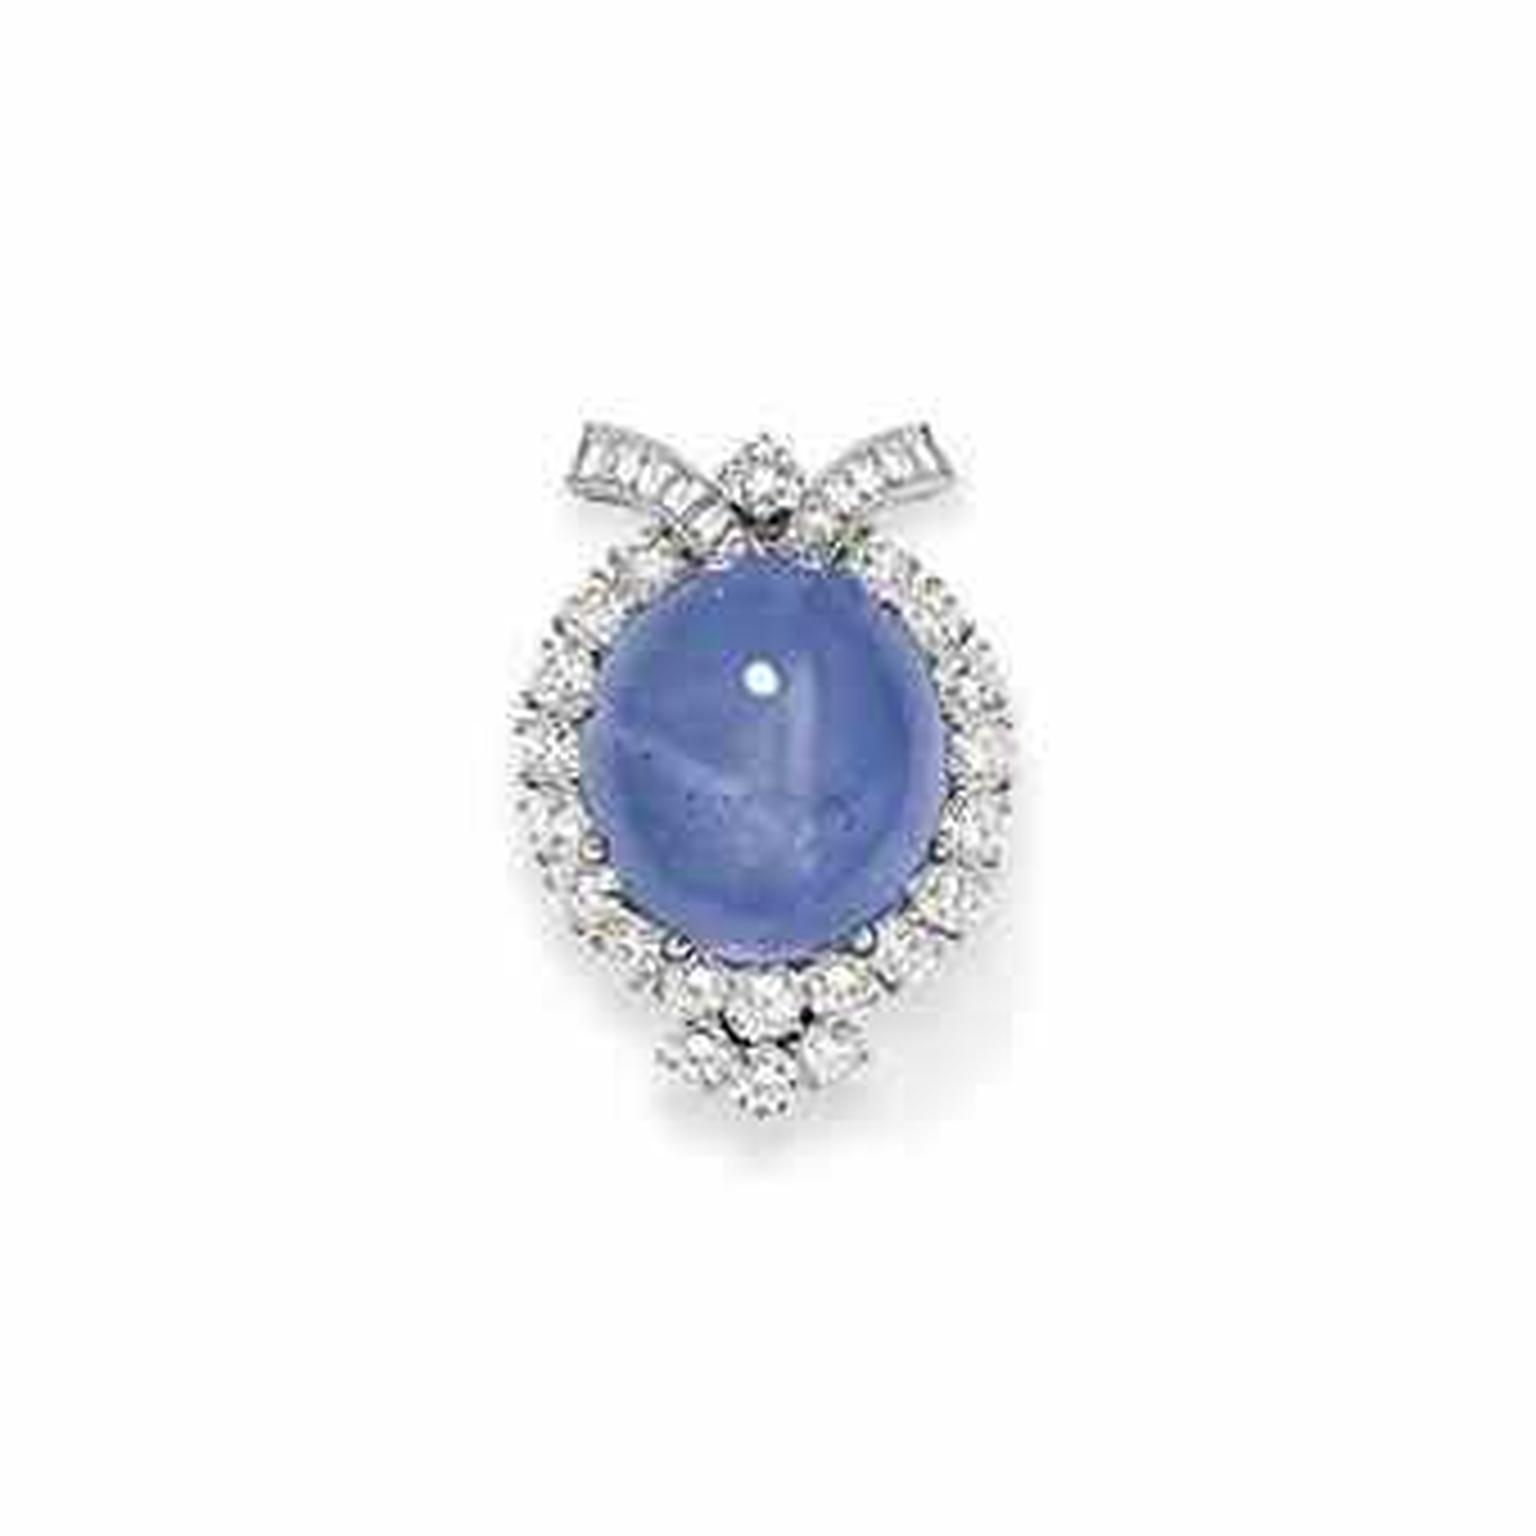 This Van Cleef & Arpels star sapphire and diamond brooch sold at Christie’s for $32,000 in 2013.